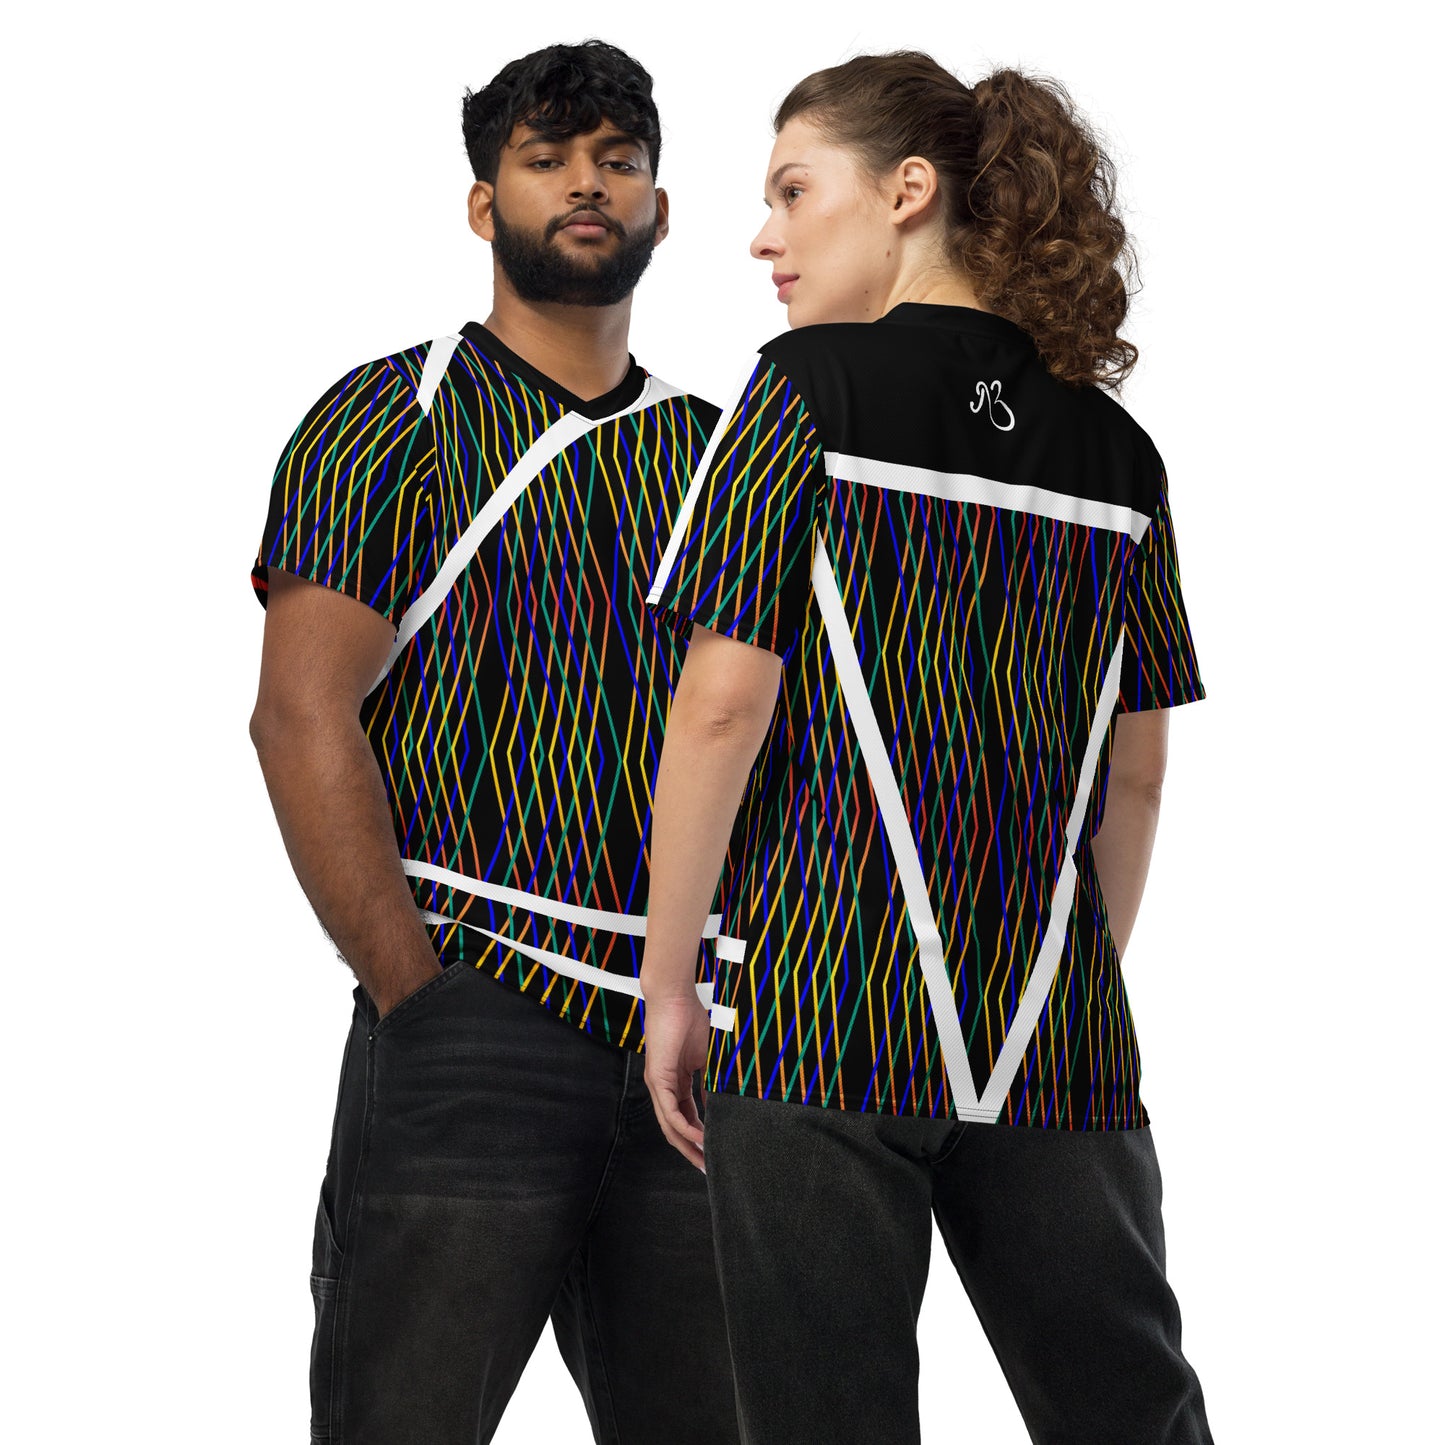 Constellation print recycled unisex sports jersey